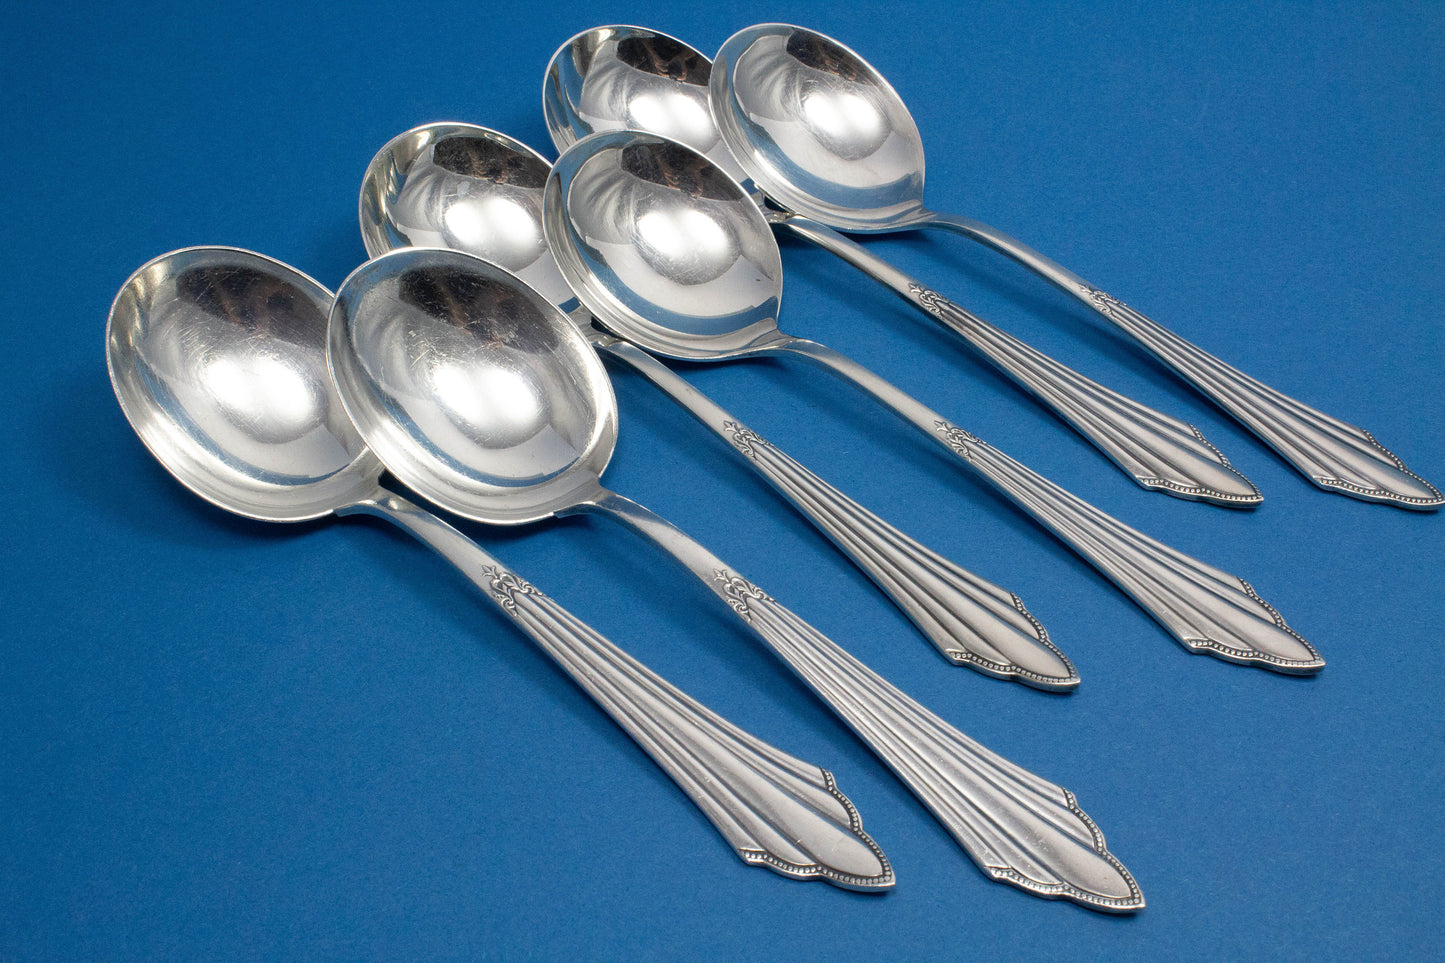 6 silver plated cup spoon, soup spoon, WMF fanned